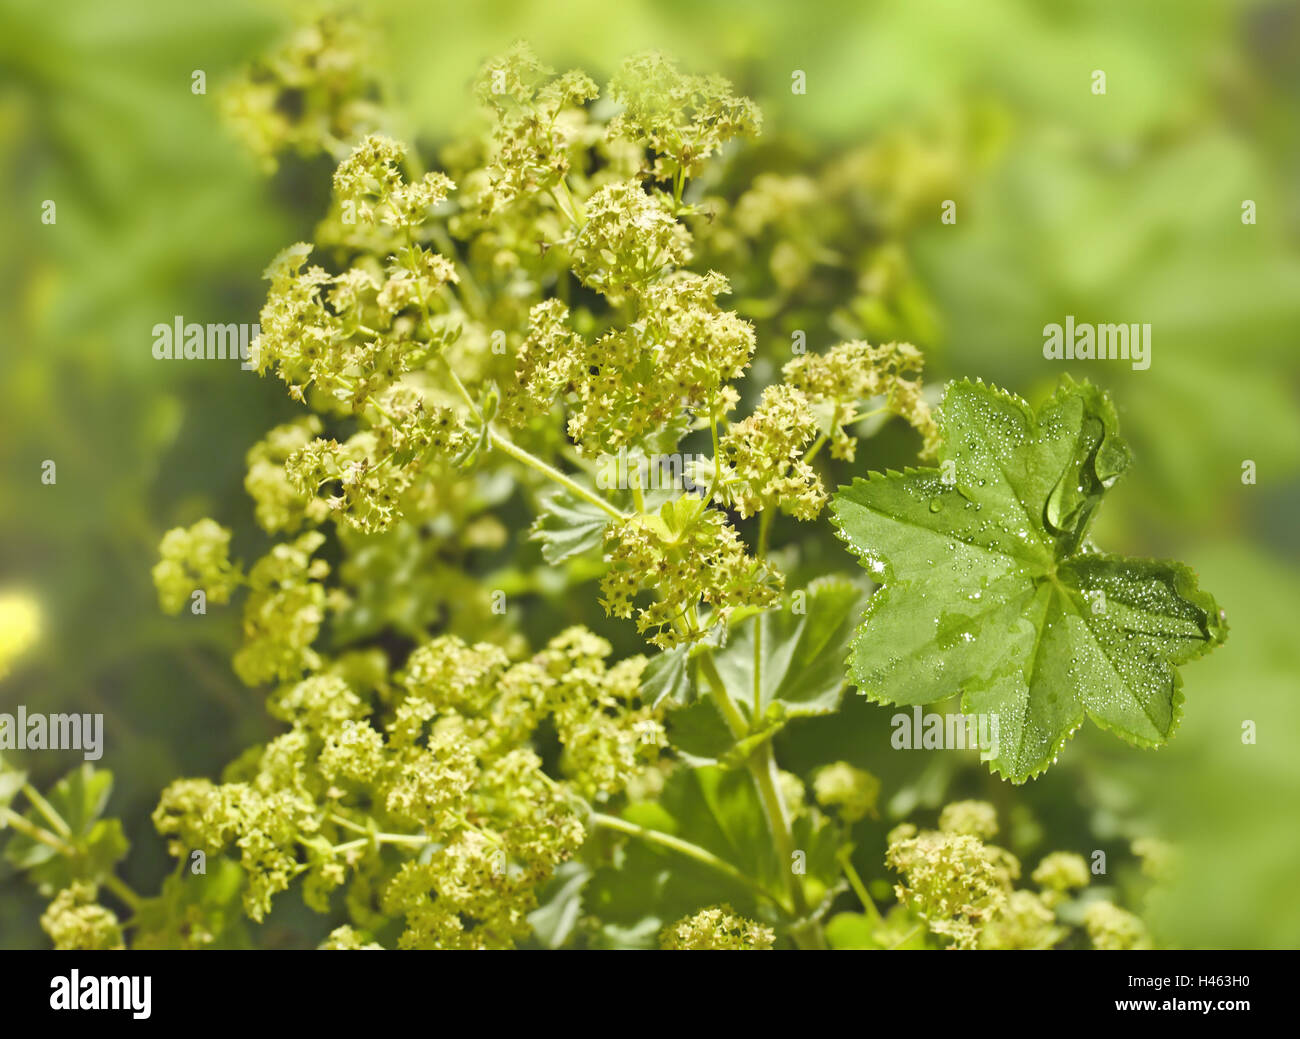 Women's casing, Alchemilla vulgaris, blossoming, leaves, drop water, rose plant, Central Europe, Stock Photo